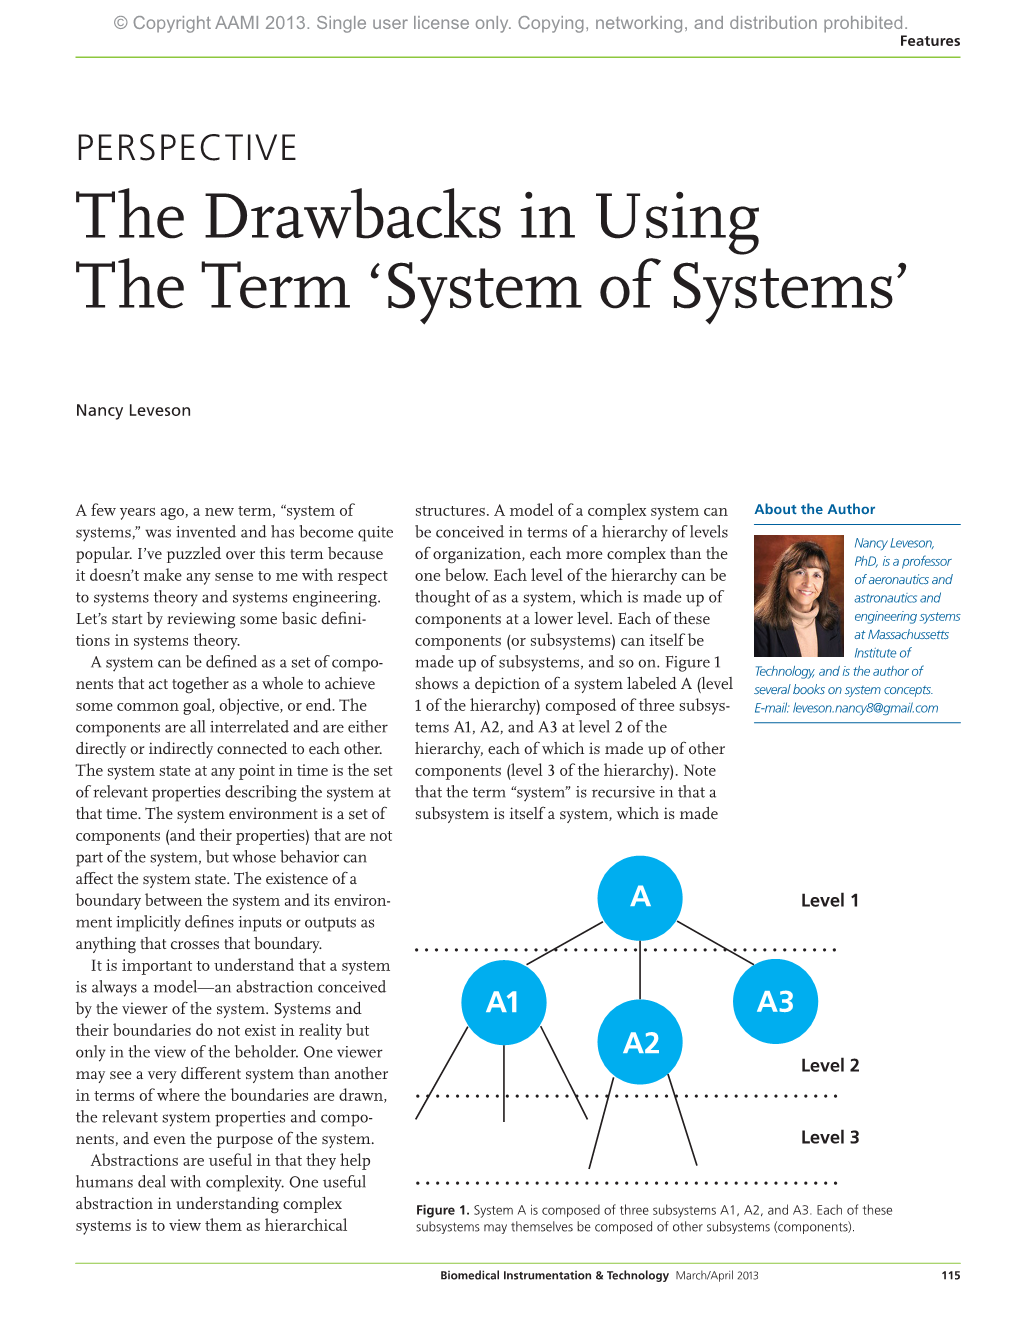 System of Systems’